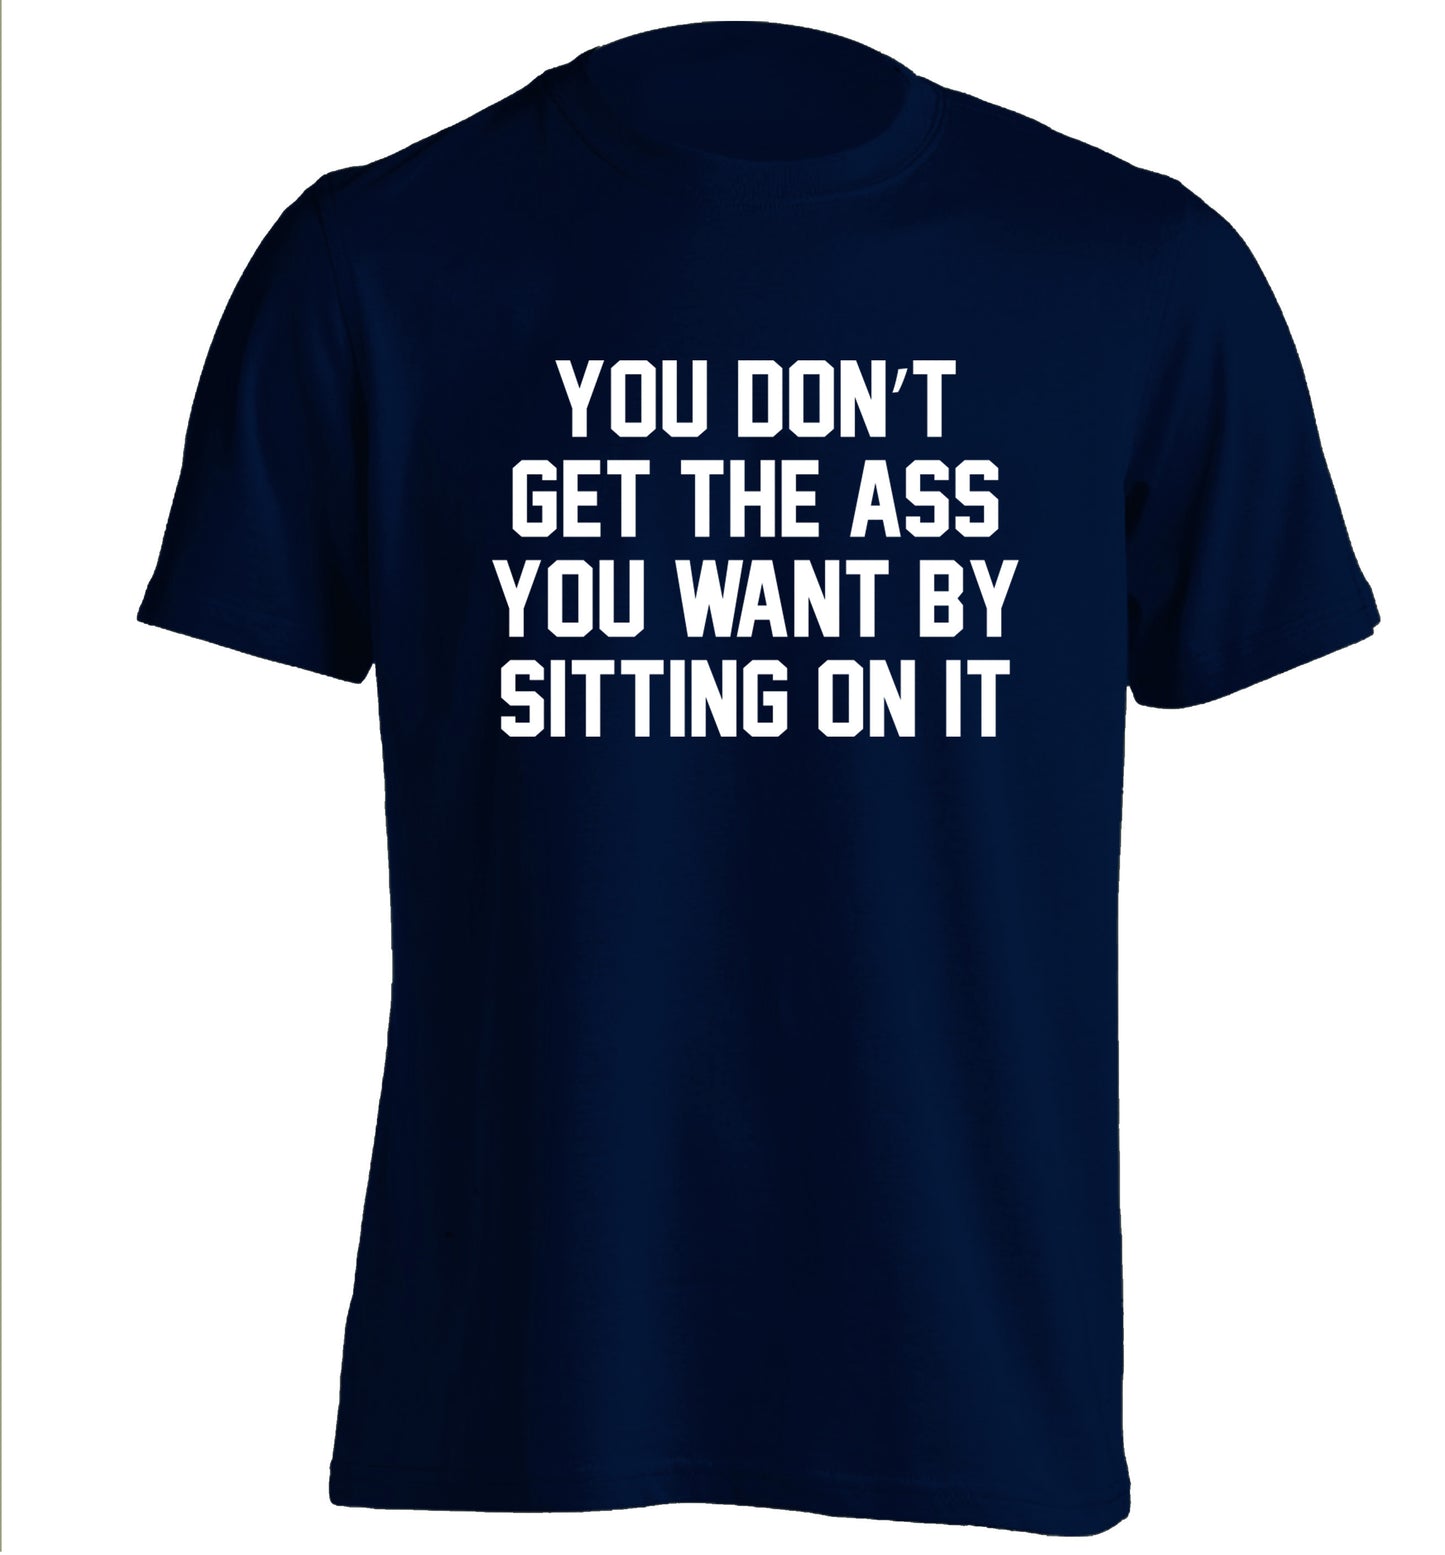 You don't get the ass you want by sitting on it adults unisex navy Tshirt 2XL